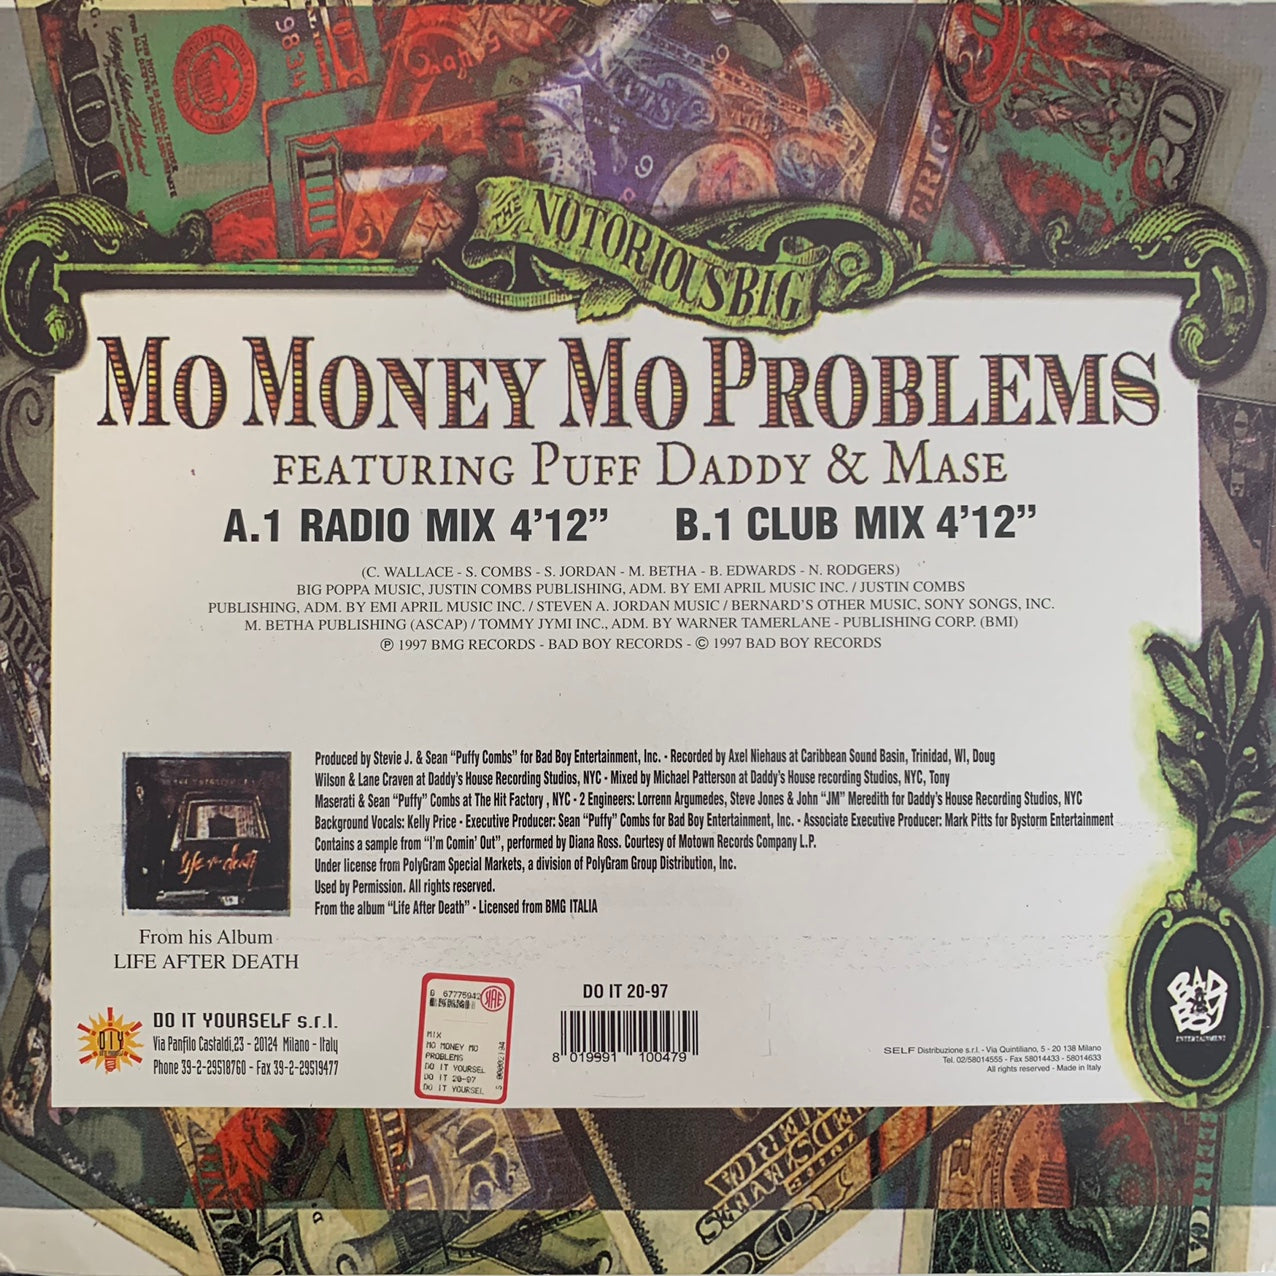 Notorious BIG feat Puff Daddy and Mase “Mo Money Mo Problems” 2 Version 12inch Vinyl